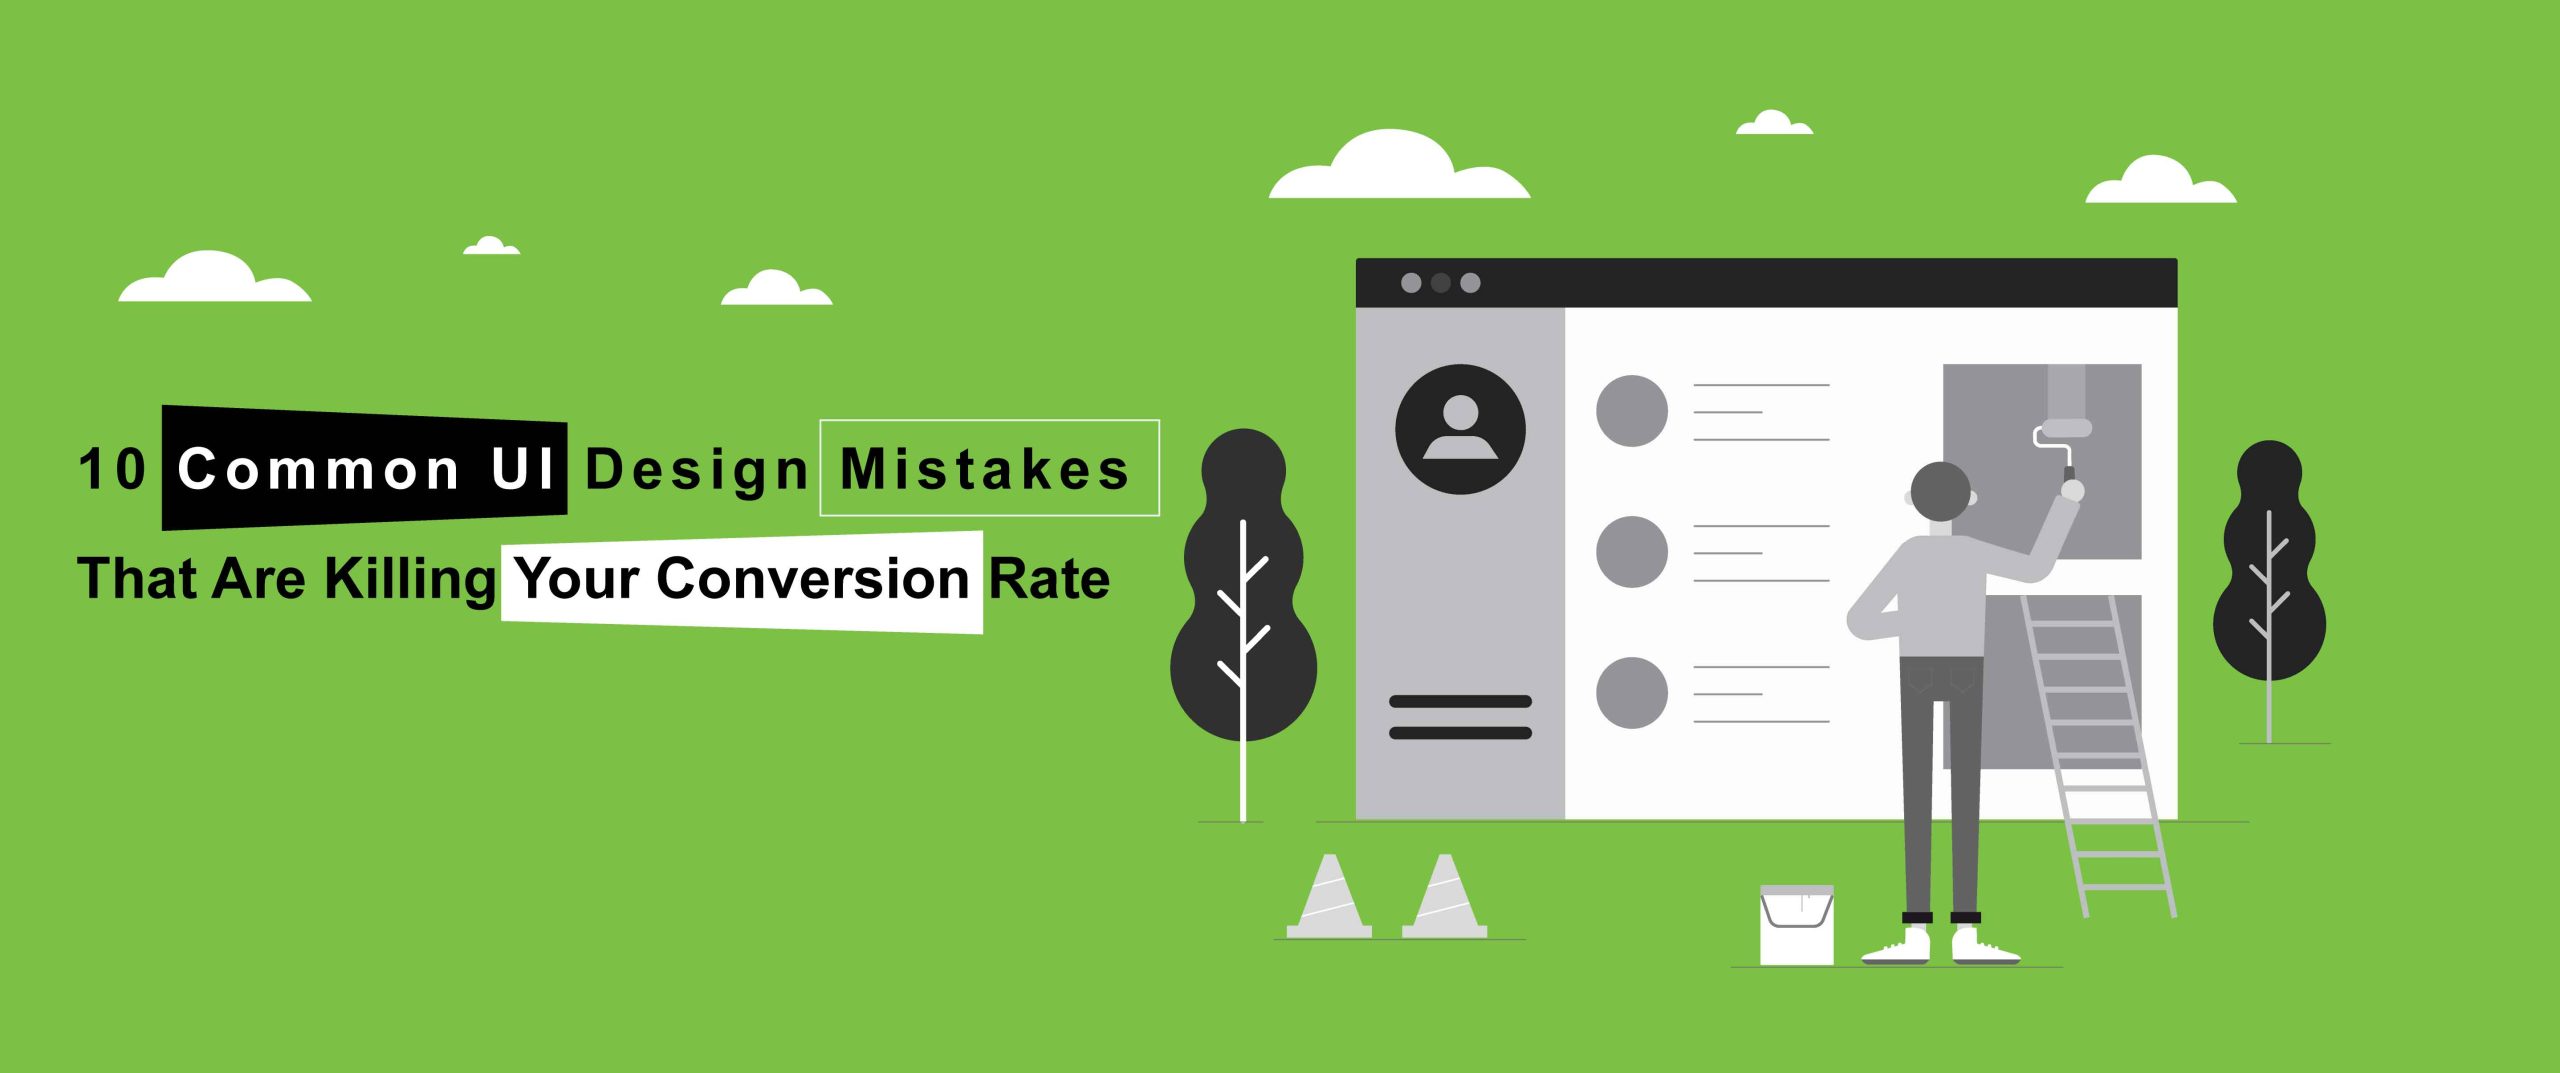 UI Design Mistakes That Are Killing Conversion Rate